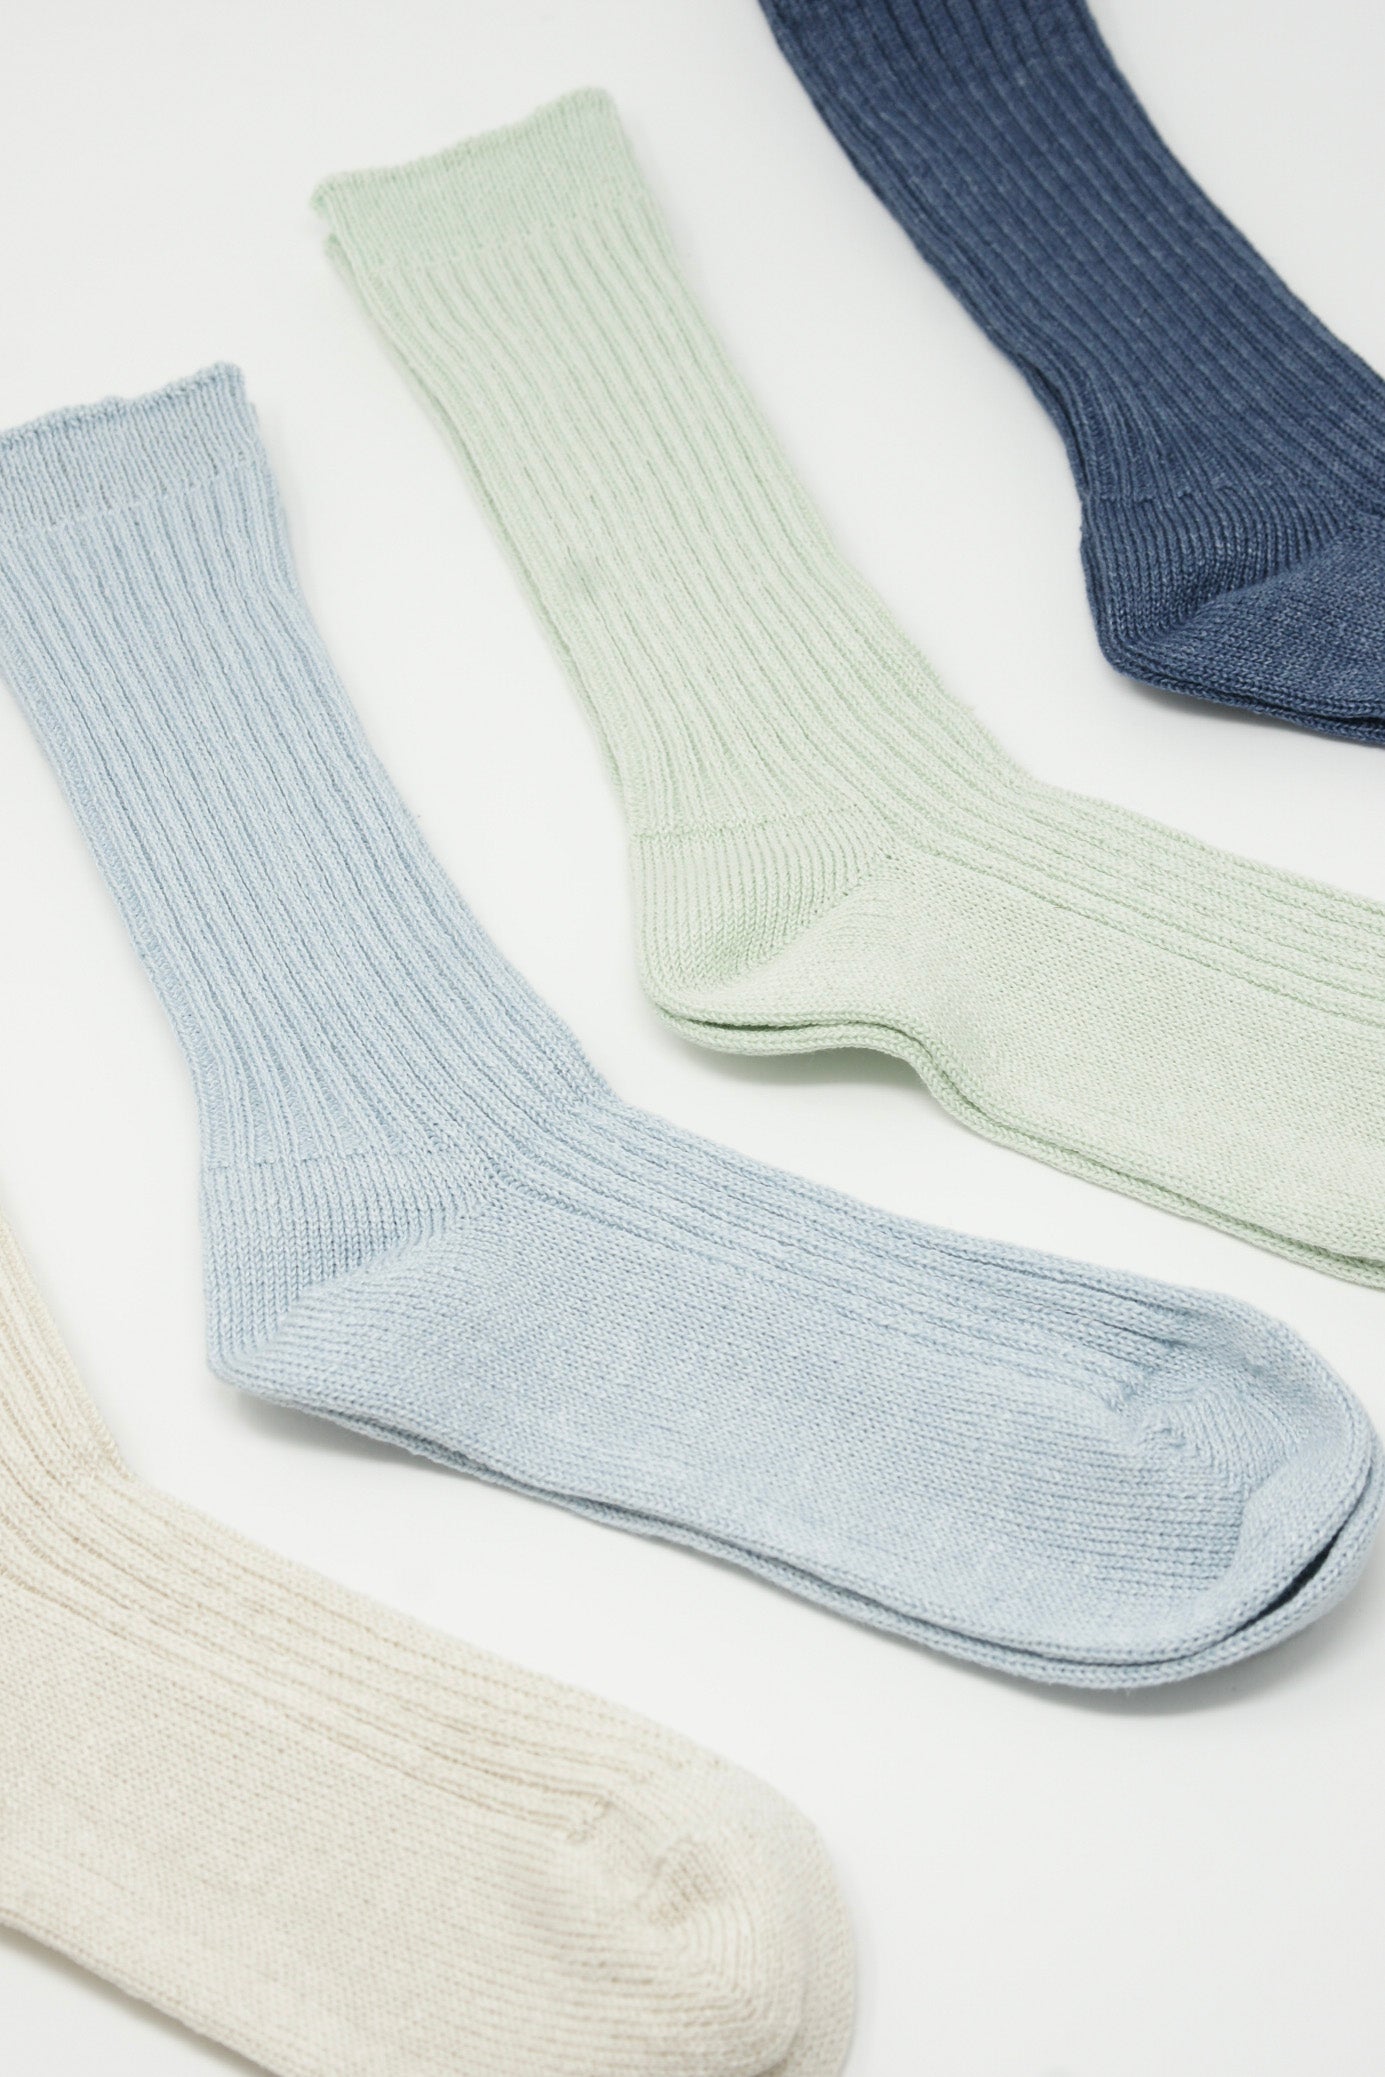 Four pairs of Linen Rib Socks in Light Blue by Ichi Antiquités on a white surface in Fukuoka Japan.